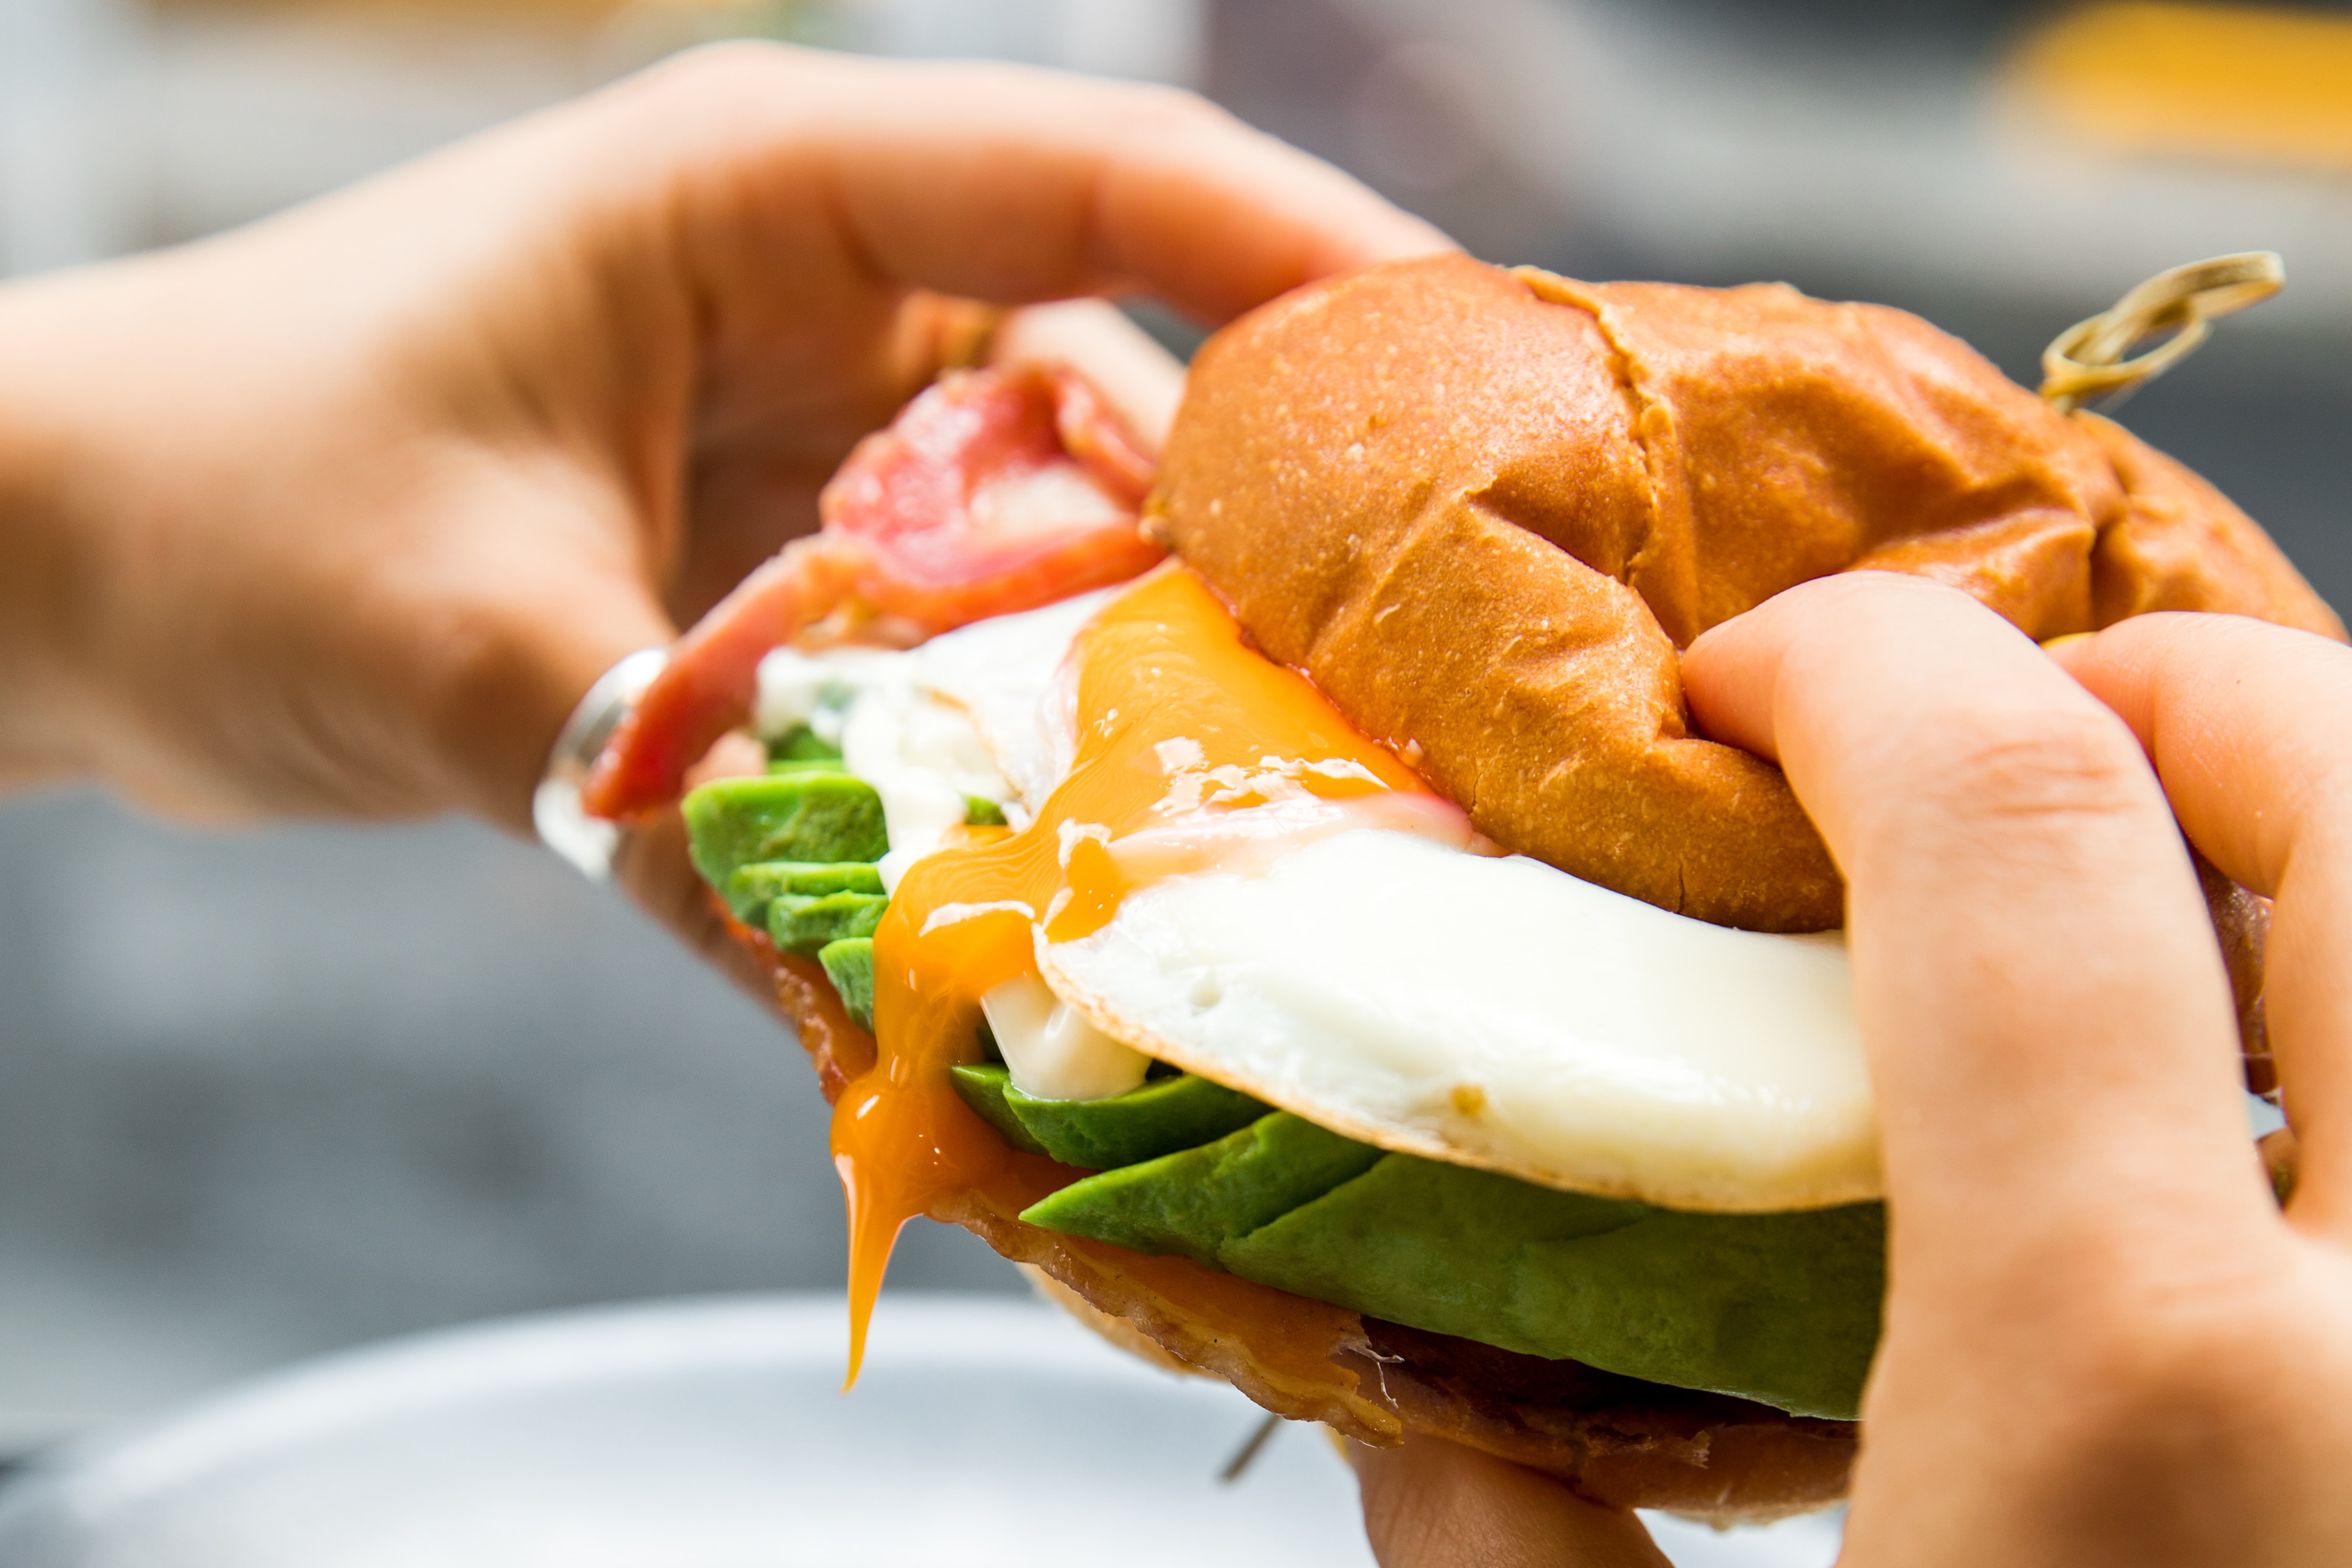 person holding breakfast sandwich with oozing egg and avocado inside.